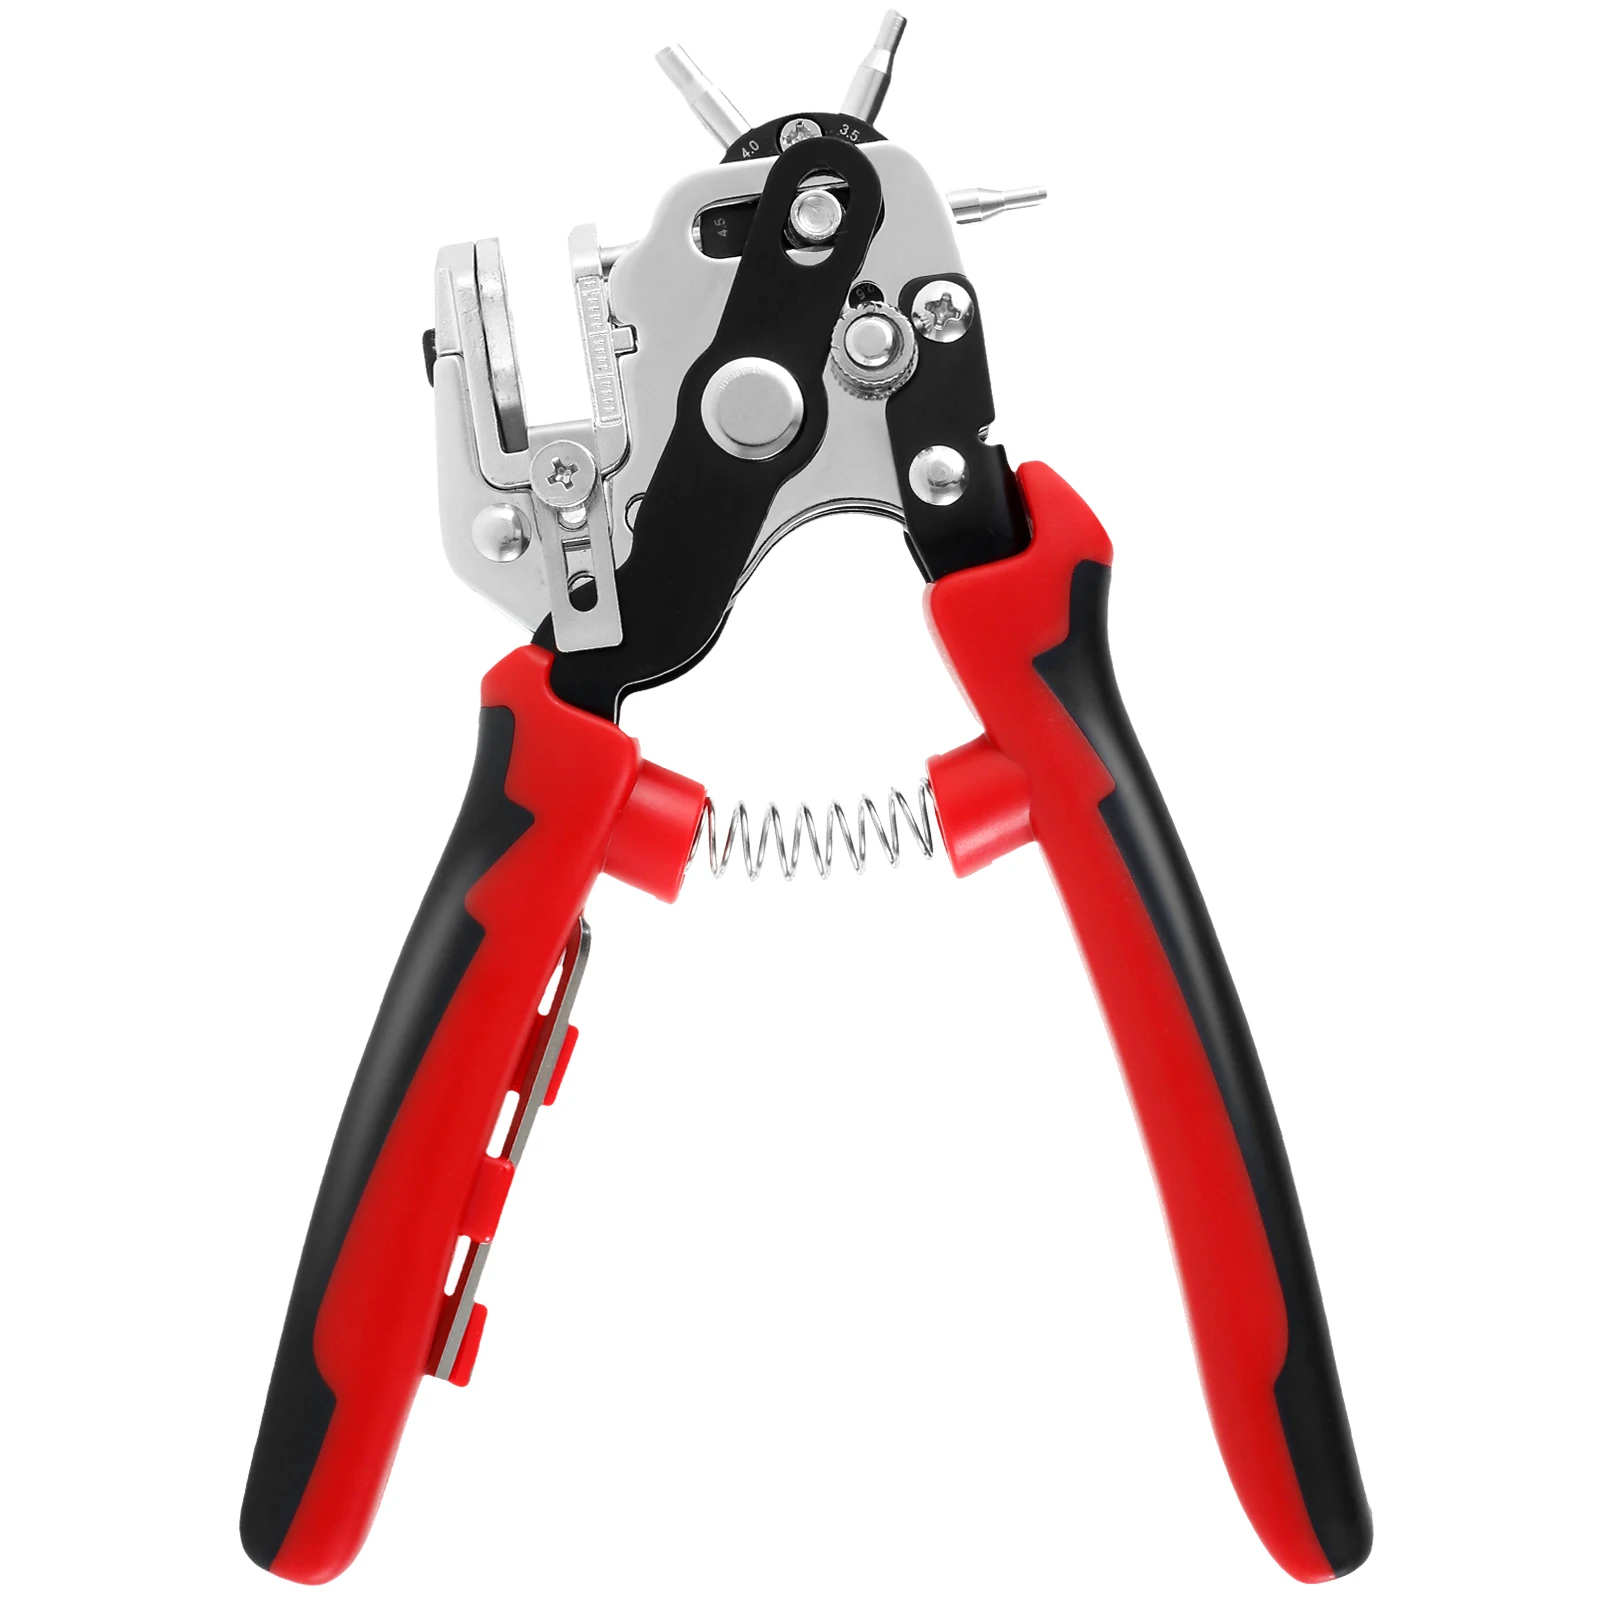 

Leather Hole Punch Tool Stainless Steel Belt Hole Puncher with 6 Holes Adjustable Hole Punch Tool Pliers with Limiter Handheld